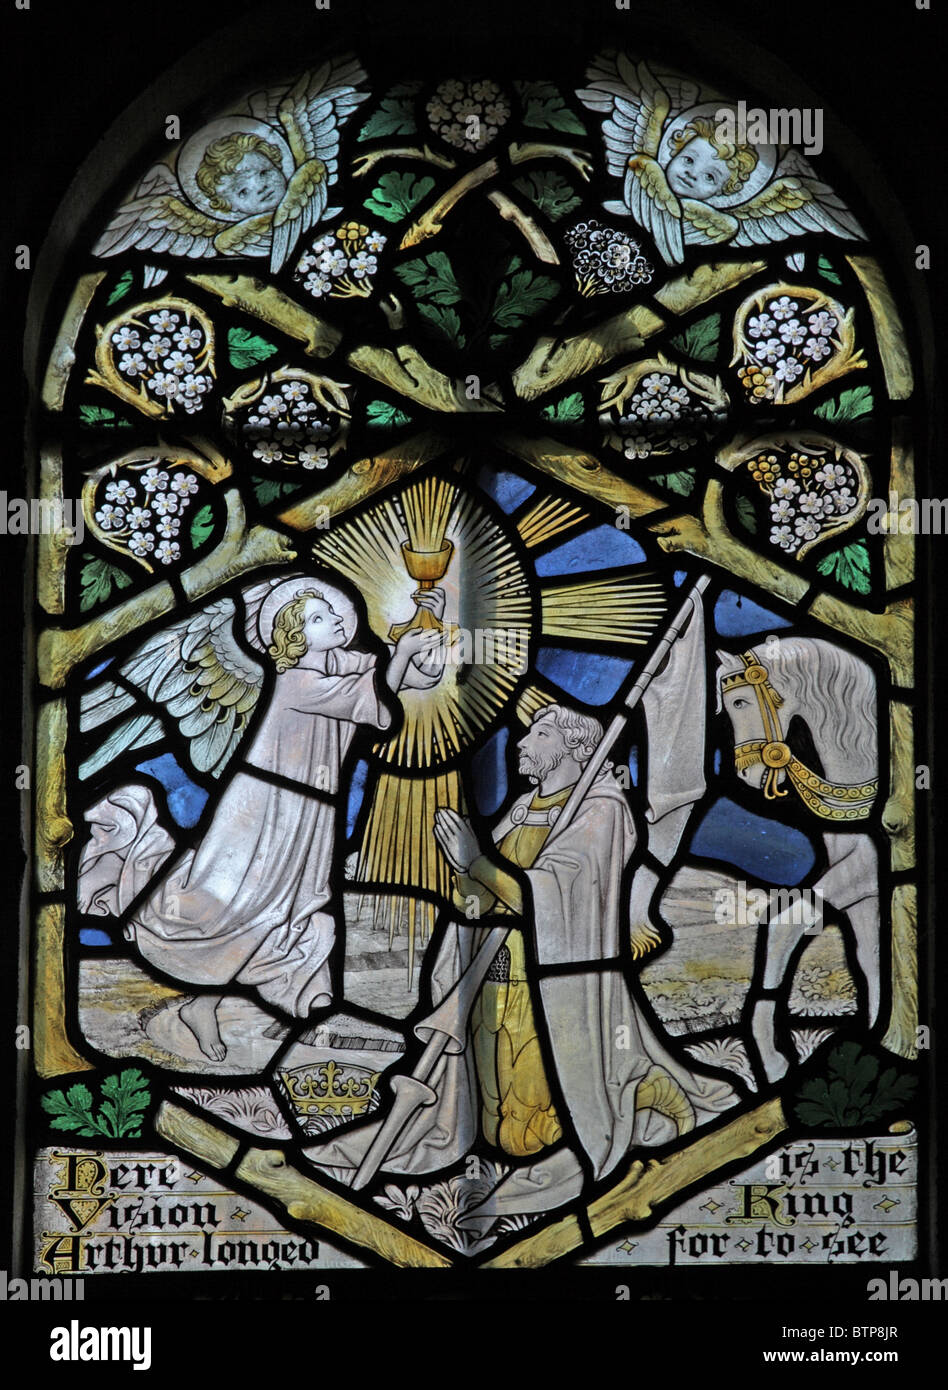 A stained glass window by Frederick Charles Eden depicting scenes from the putative life of Joseph of Arimathea (the story of Glastonbury) Stock Photo